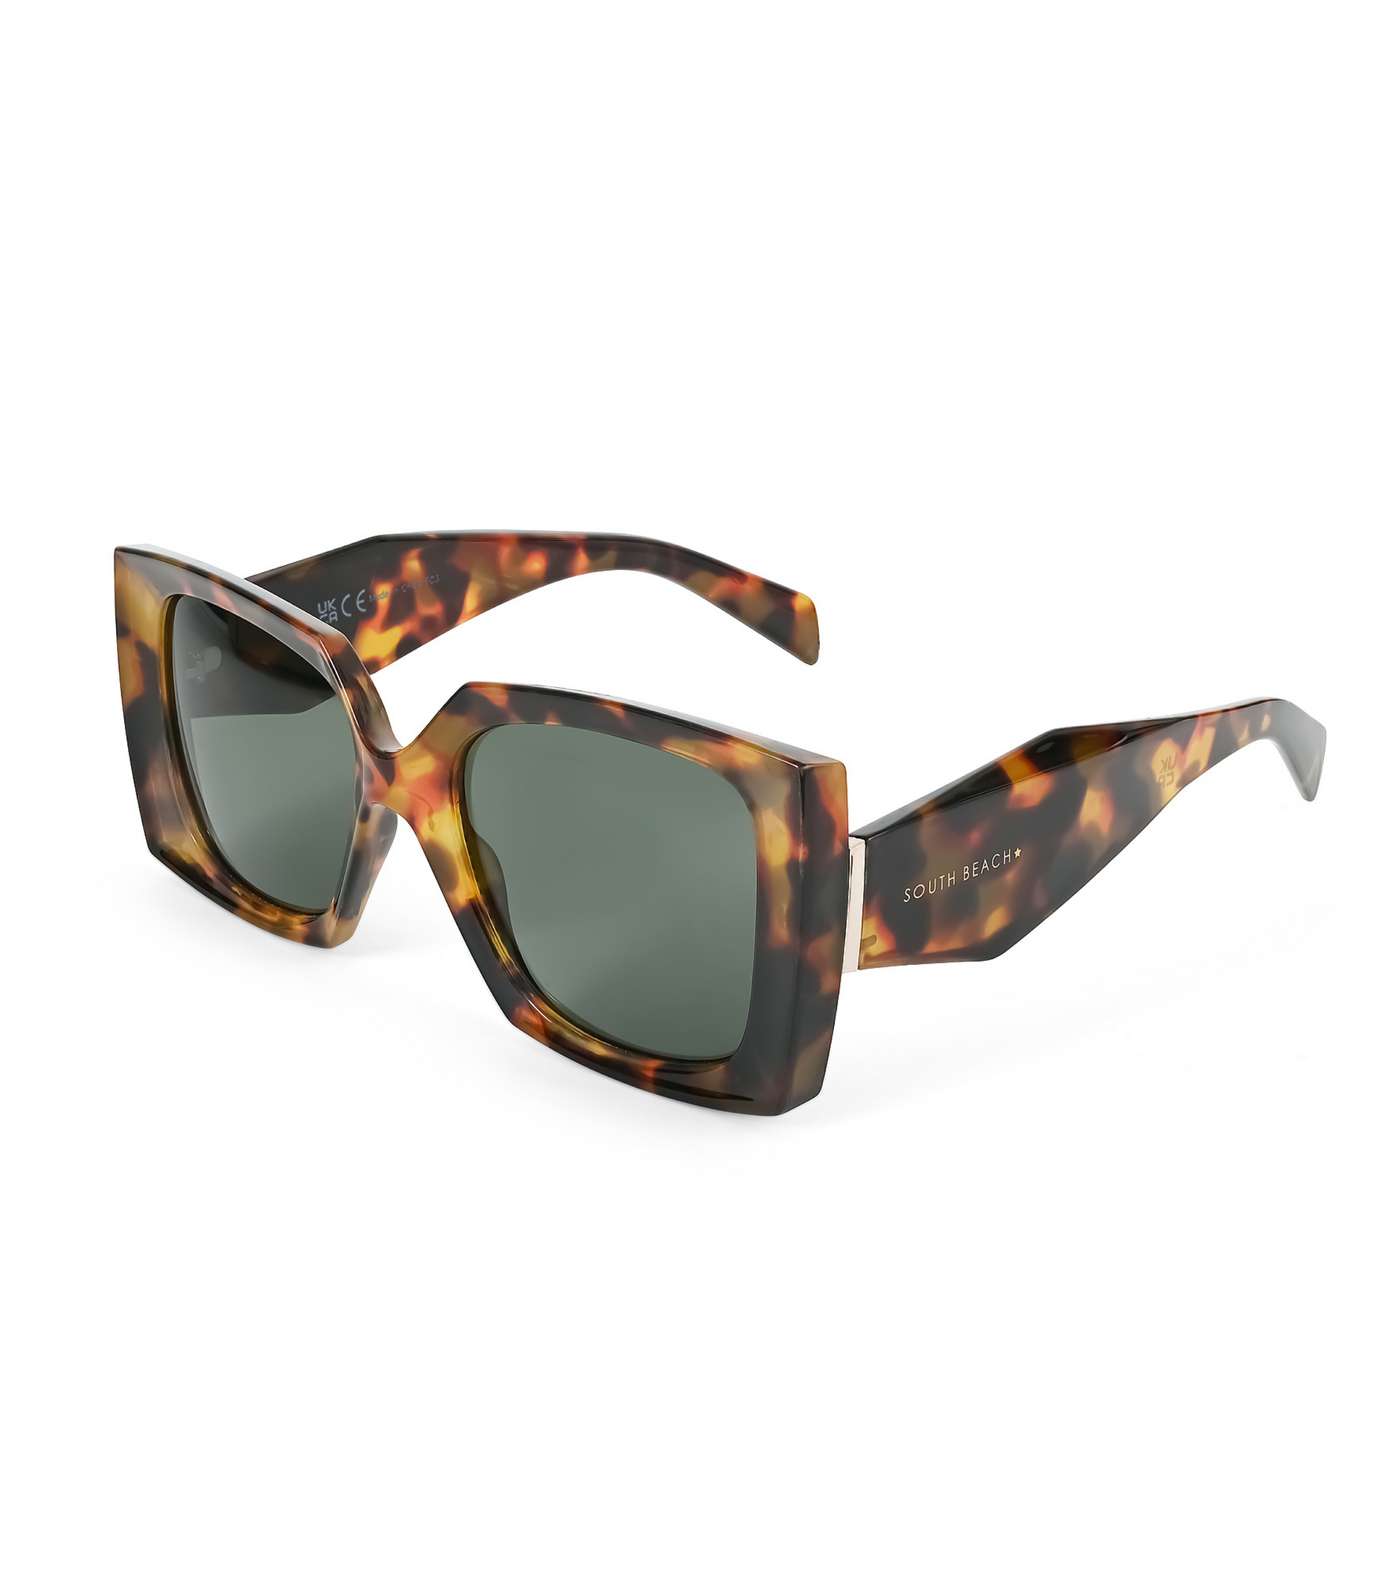 South Beach Brown Oversized Square Frame Sunglasses Image 2